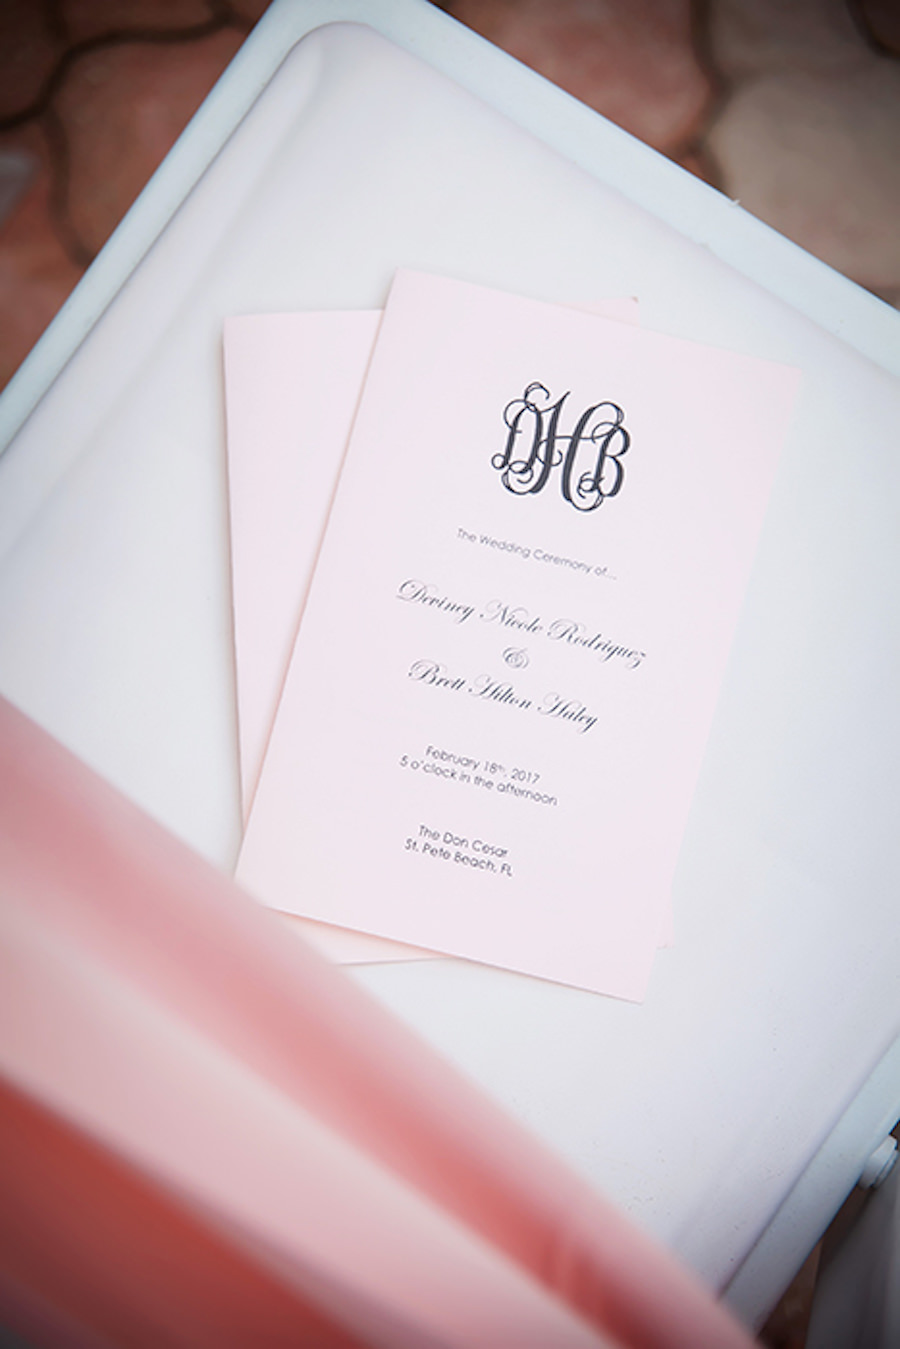 Elegant and Classic Wedding Day Programs On Light Pink Paper with Grey Monogram by Invitation Galleria Tampa FL